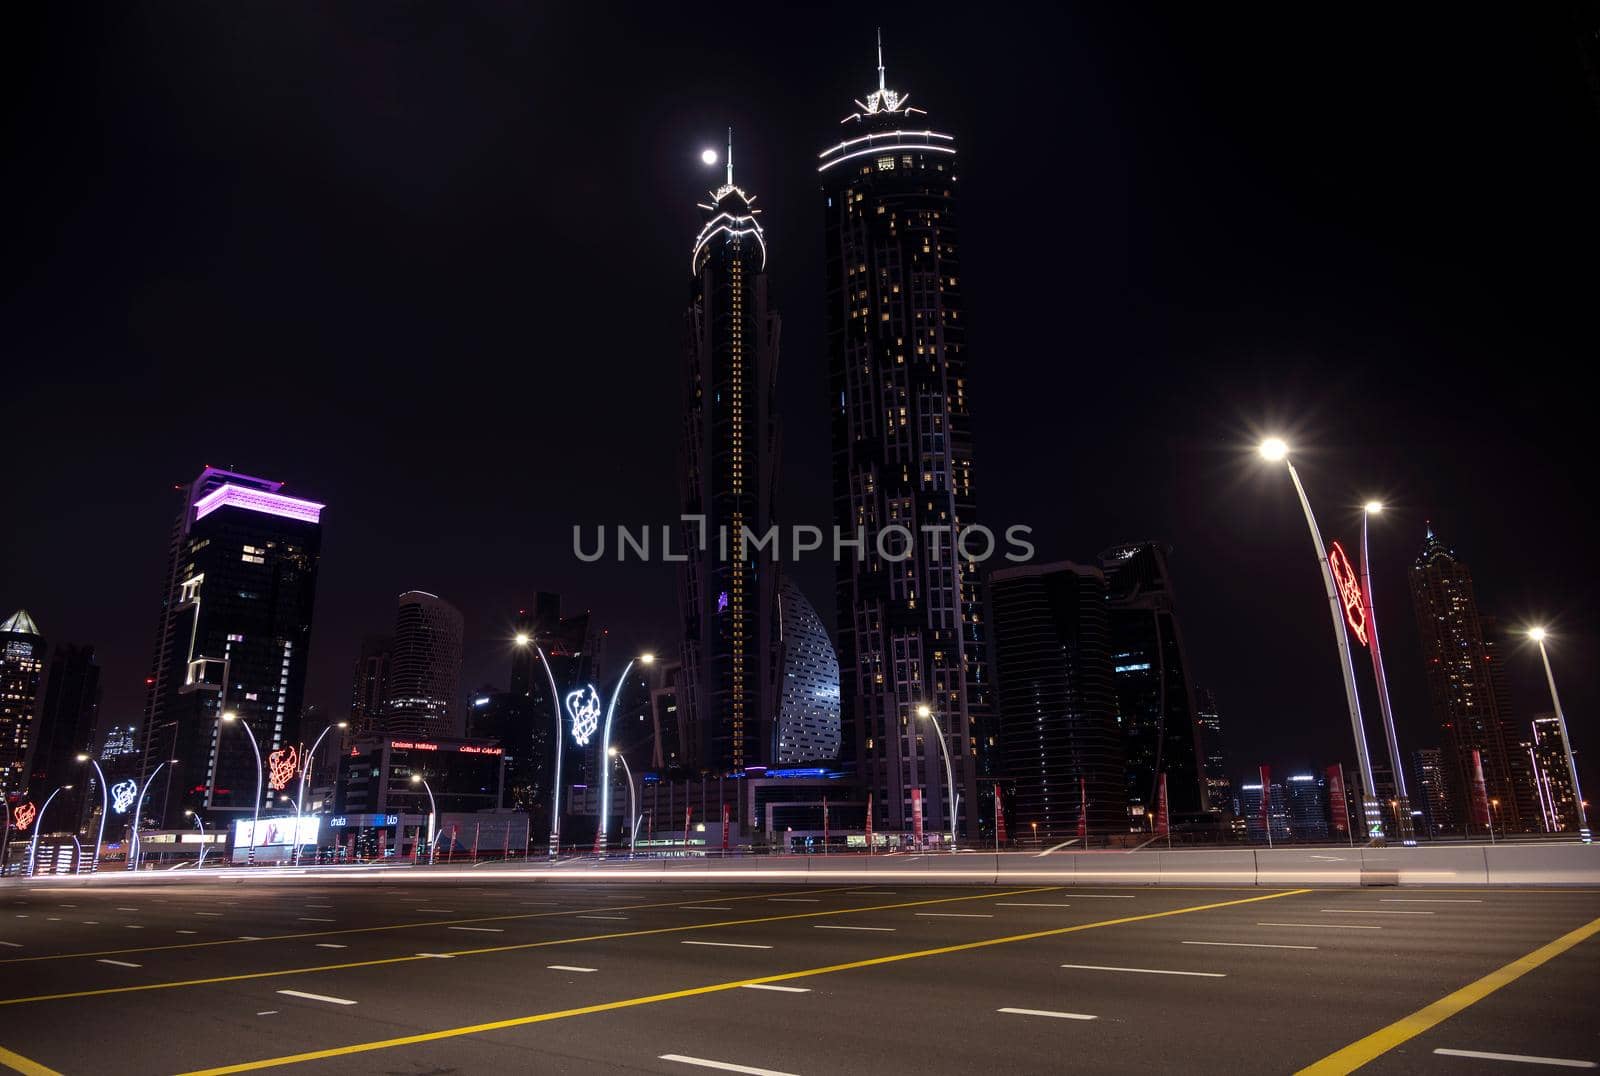 1ST jan 2021, Dubai , UAE.Moving traffic on the busy road with JW Marriott hotel and other sky scrappers in the background on a moonlit night captured at Dubai, UAE. by sriyapixels